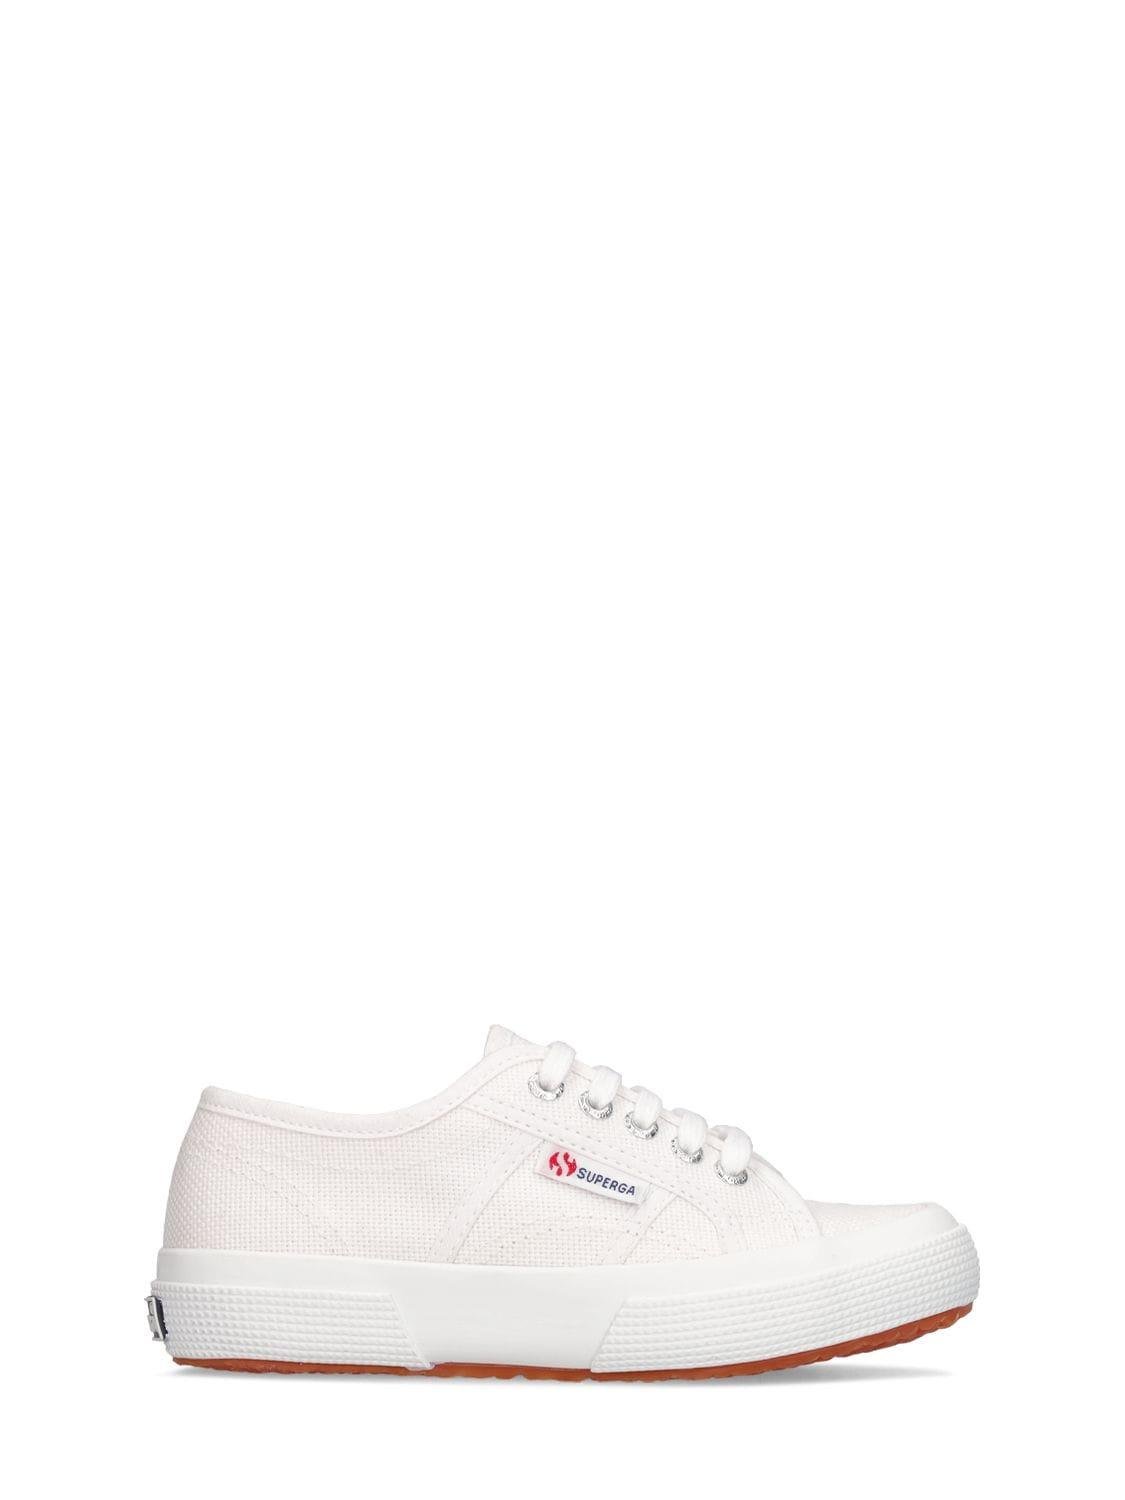 2750-jcot Classic Canvas Sneakers by SUPERGA